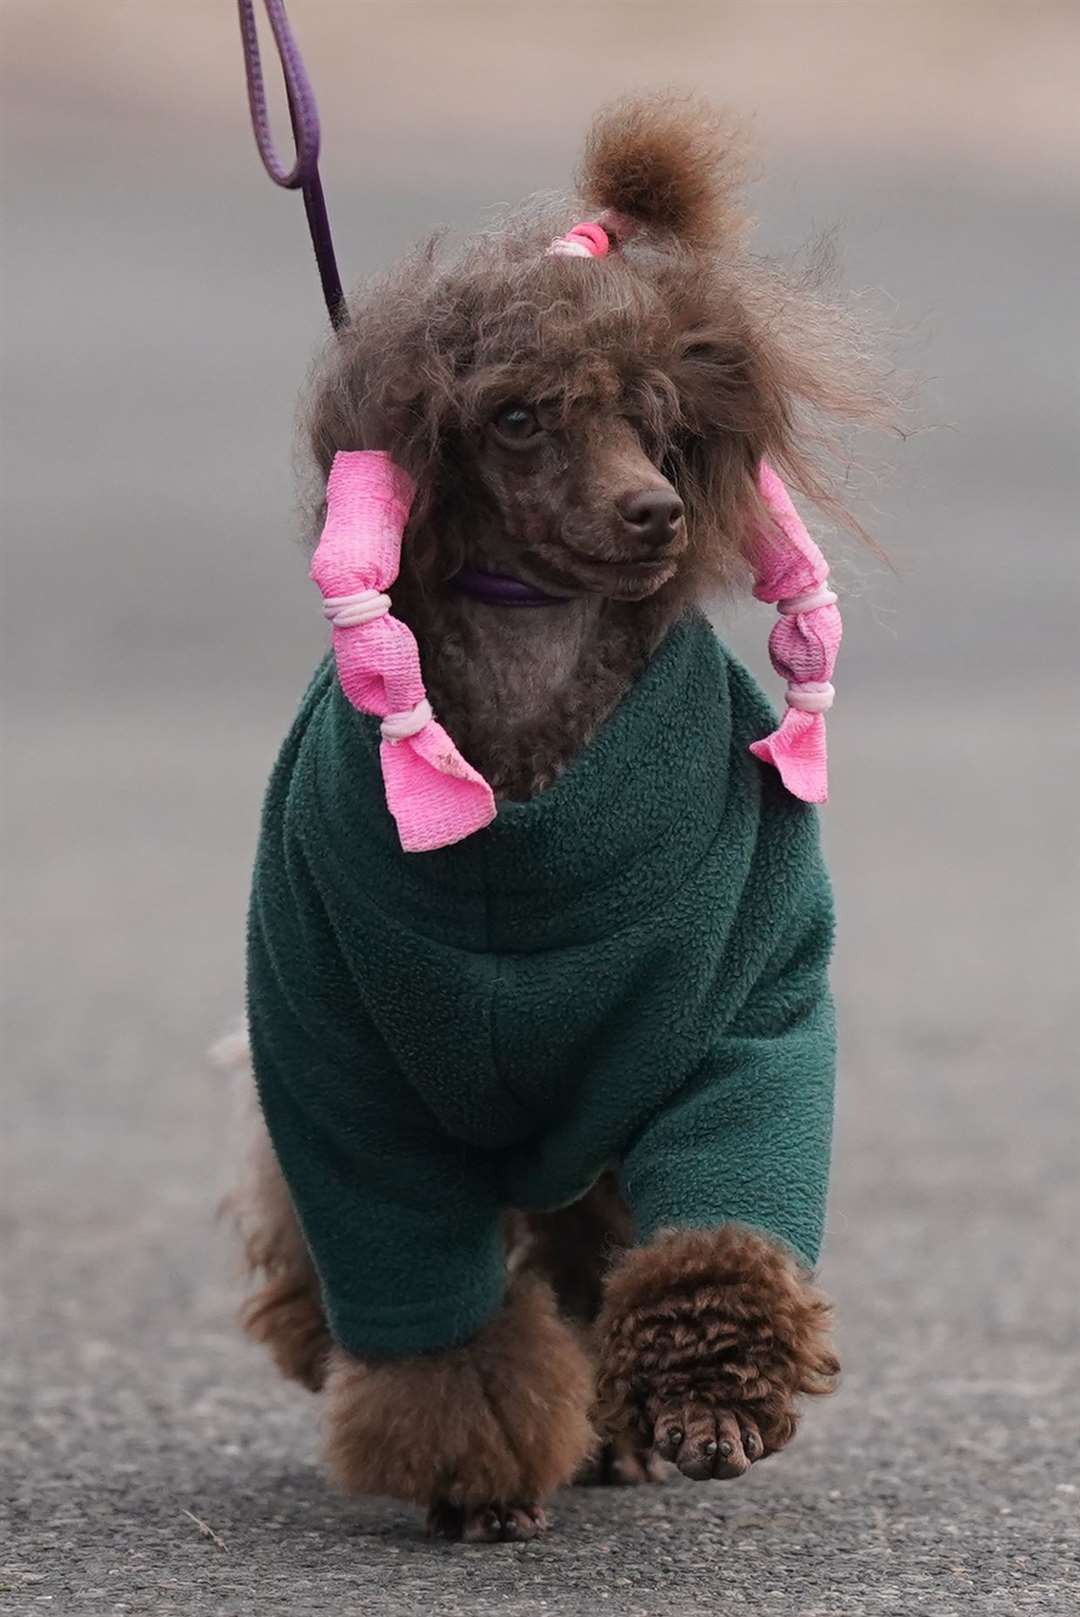 One dog wore a green coat and pink hair accessories (Jacob King/PA)